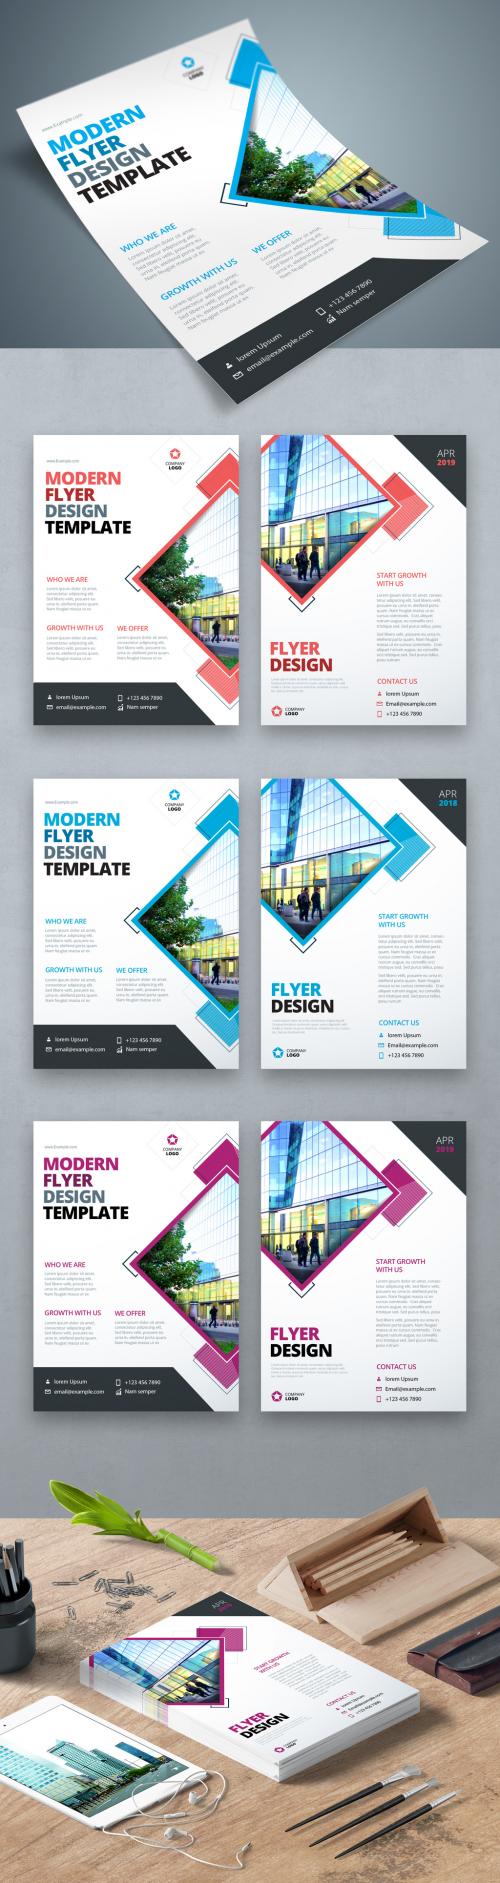 Adobe Stock - Flyer Layout with Layered Diamond Shapes - 221009554